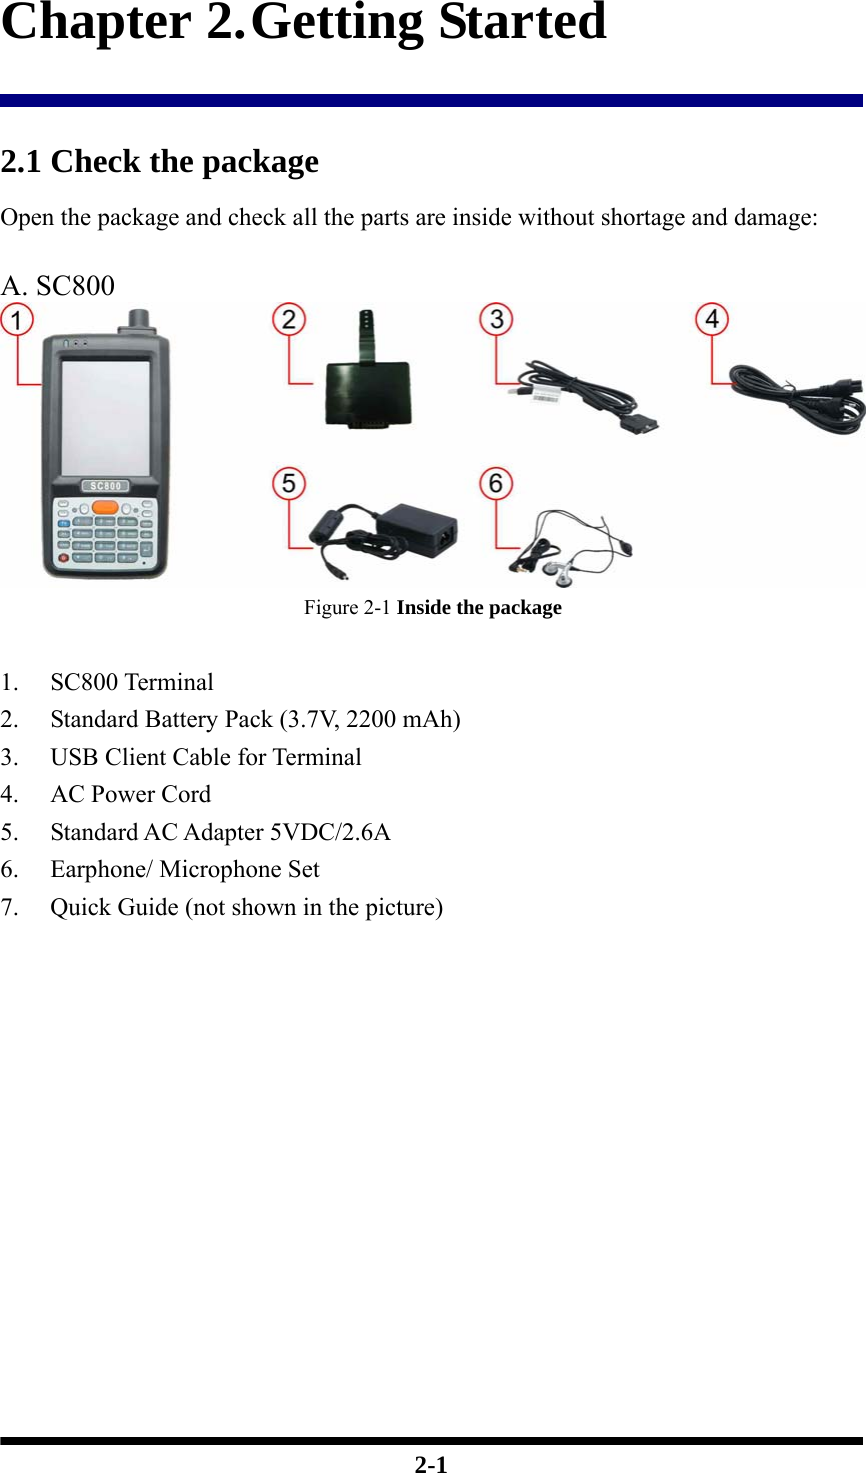  2-1 Chapter 2. Getting Started  2.1 Check the package Open the package and check all the parts are inside without shortage and damage:  A. SC800  Figure 2-1 Inside the package  1. SC800 Terminal 2. Standard Battery Pack (3.7V, 2200 mAh) 3. USB Client Cable for Terminal 4. AC Power Cord   5. Standard AC Adapter 5VDC/2.6A 6. Earphone/ Microphone Set 7. Quick Guide (not shown in the picture)             